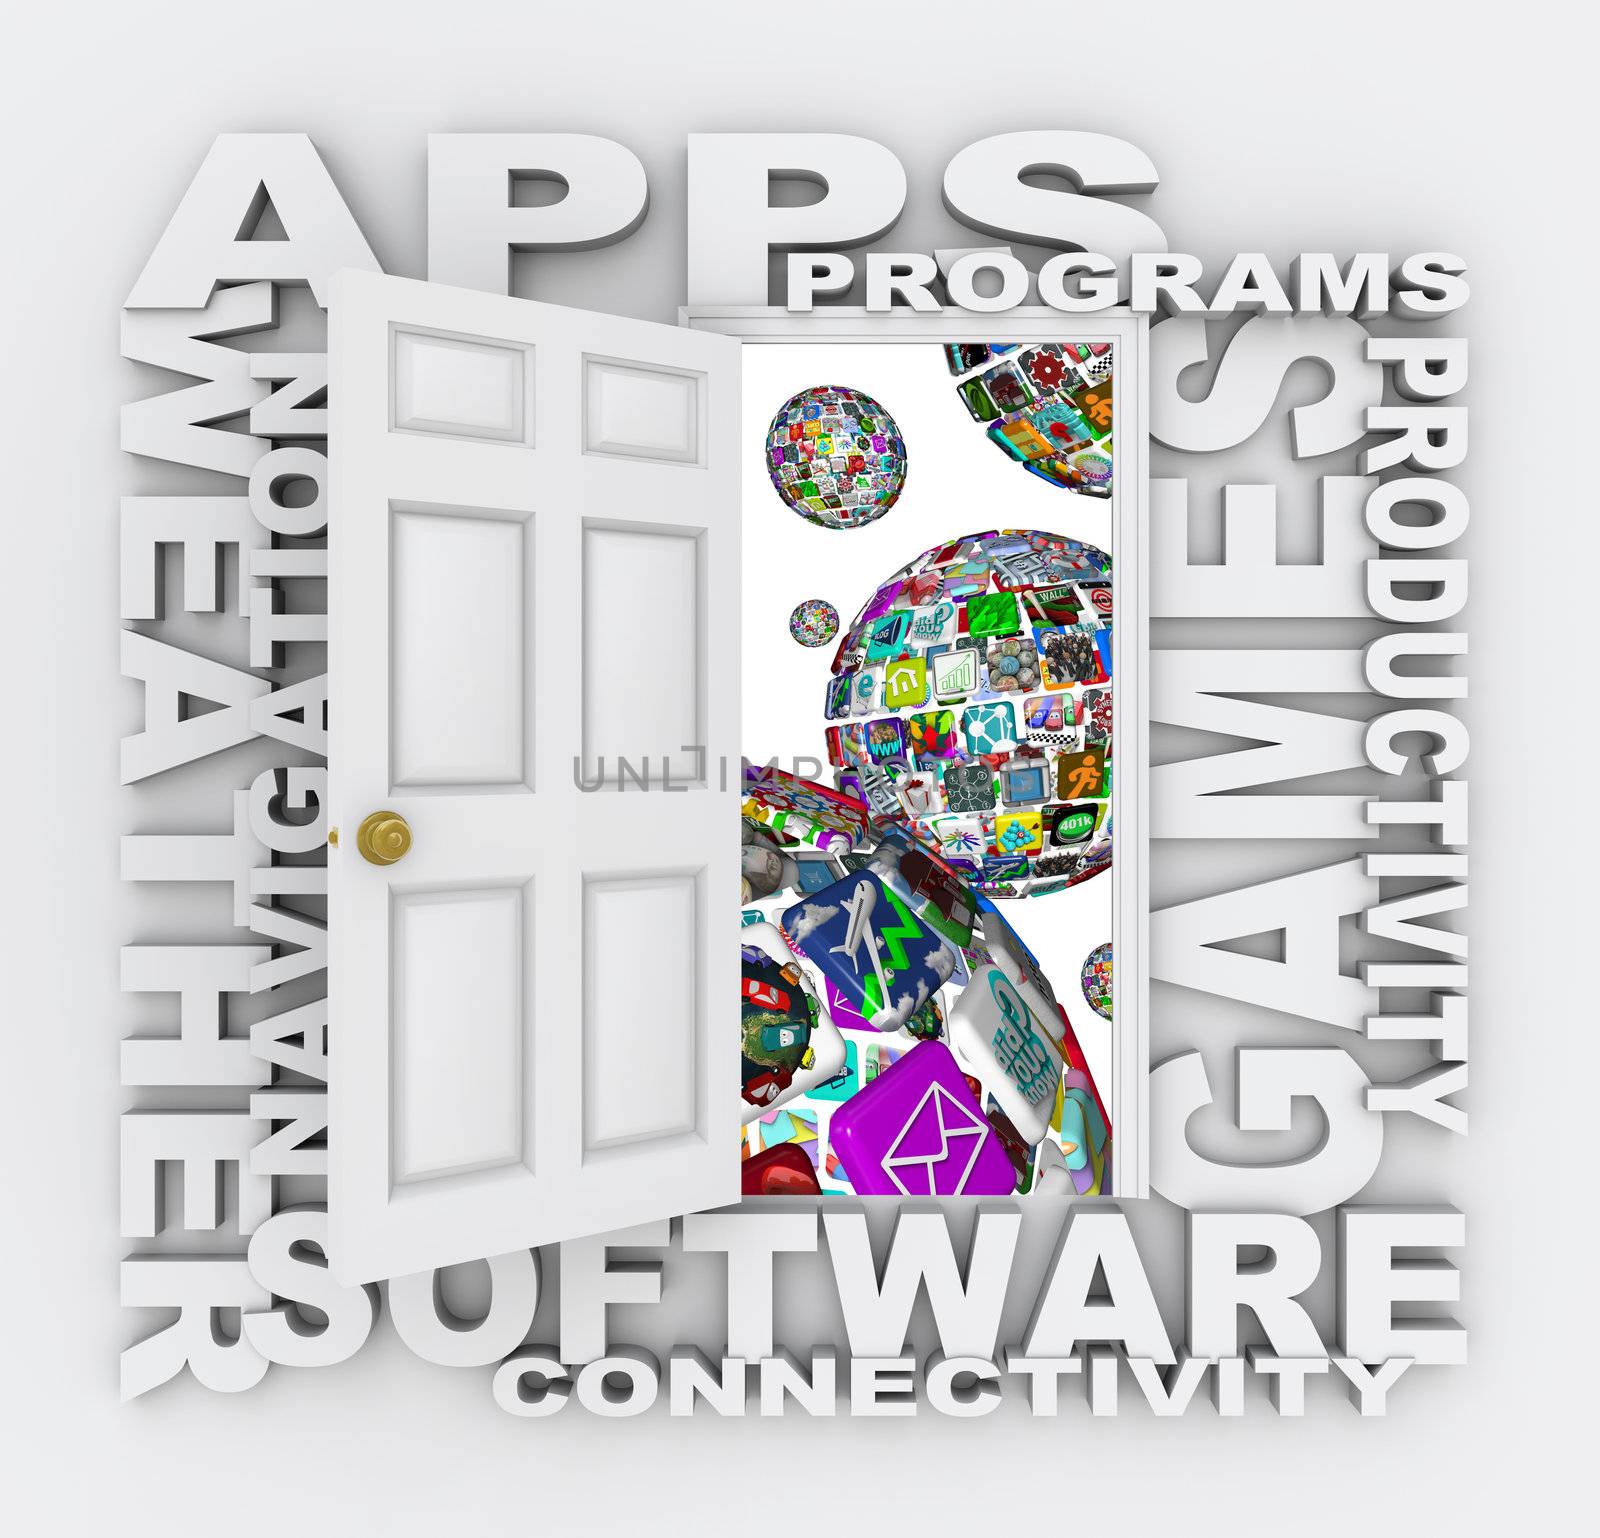 A door opens to reveal many words of apps - spheres made up of application icons and tiles for downloading to a smart phone, tablet computer or other mobile device